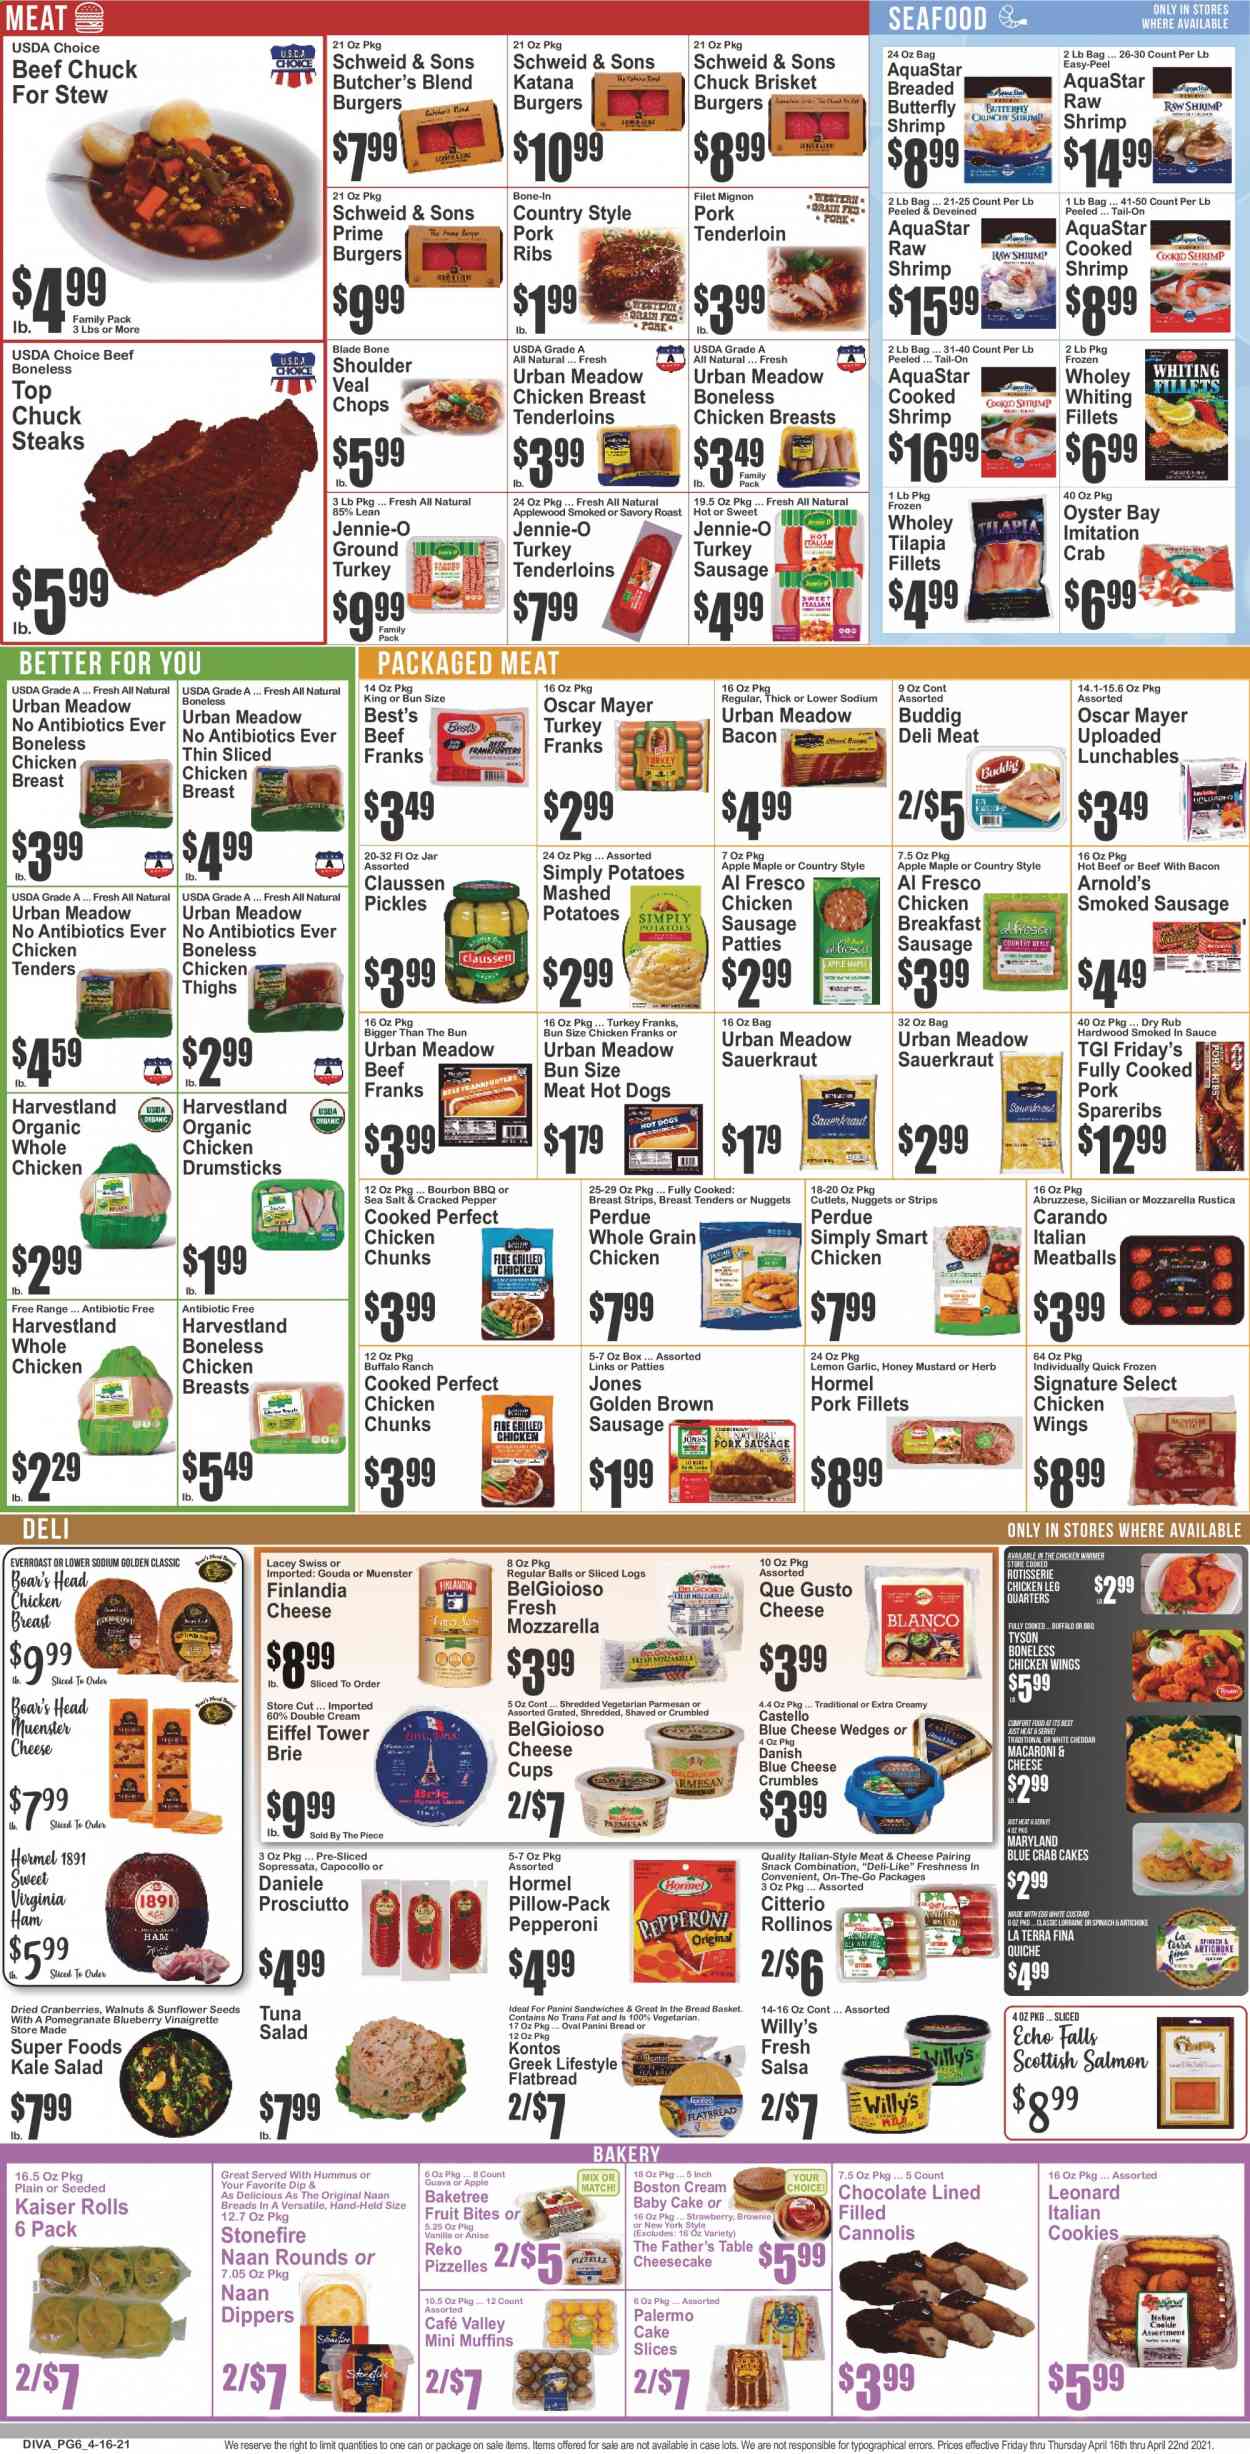 thumbnail - Key Food Flyer - 04/16/2021 - 04/22/2021 - Sales products - panini, flatbread, Father's Table, cheesecake, muffin, garlic, kale, salad, salmon, tilapia, tuna, oysters, seafood, shrimps, whiting fillets, whiting, crab cake, macaroni & cheese, mashed potatoes, hot dog, chicken roast, meatballs, nuggets, hamburger, Perdue®, Lunchables, Hormel, ham, prosciutto, virginia ham, Oscar Mayer, sausage, smoked sausage, pepperoni, chicken frankfurters, hummus, tuna salad, blue cheese, gouda, cheese cup, parmesan, brie, Münster cheese, cheese crumbles, custard, chicken wings, strips, quiche, cookies, chocolate, snack, cranberries, sauerkraut, pickles, pepper, herbs, mustard, vinaigrette dressing, honey mustard, salsa, walnuts, dried fruit, ground turkey, whole chicken, chicken legs, chicken tenders, chicken thighs, chicken drumsticks, turkey tenderloin, veal cutlet, veal meat, steak, beef tenderloin, pork meat, pork ribs, pork tenderloin, pork spare ribs, fork, bread basket, cup, pomegranate. Page 6.